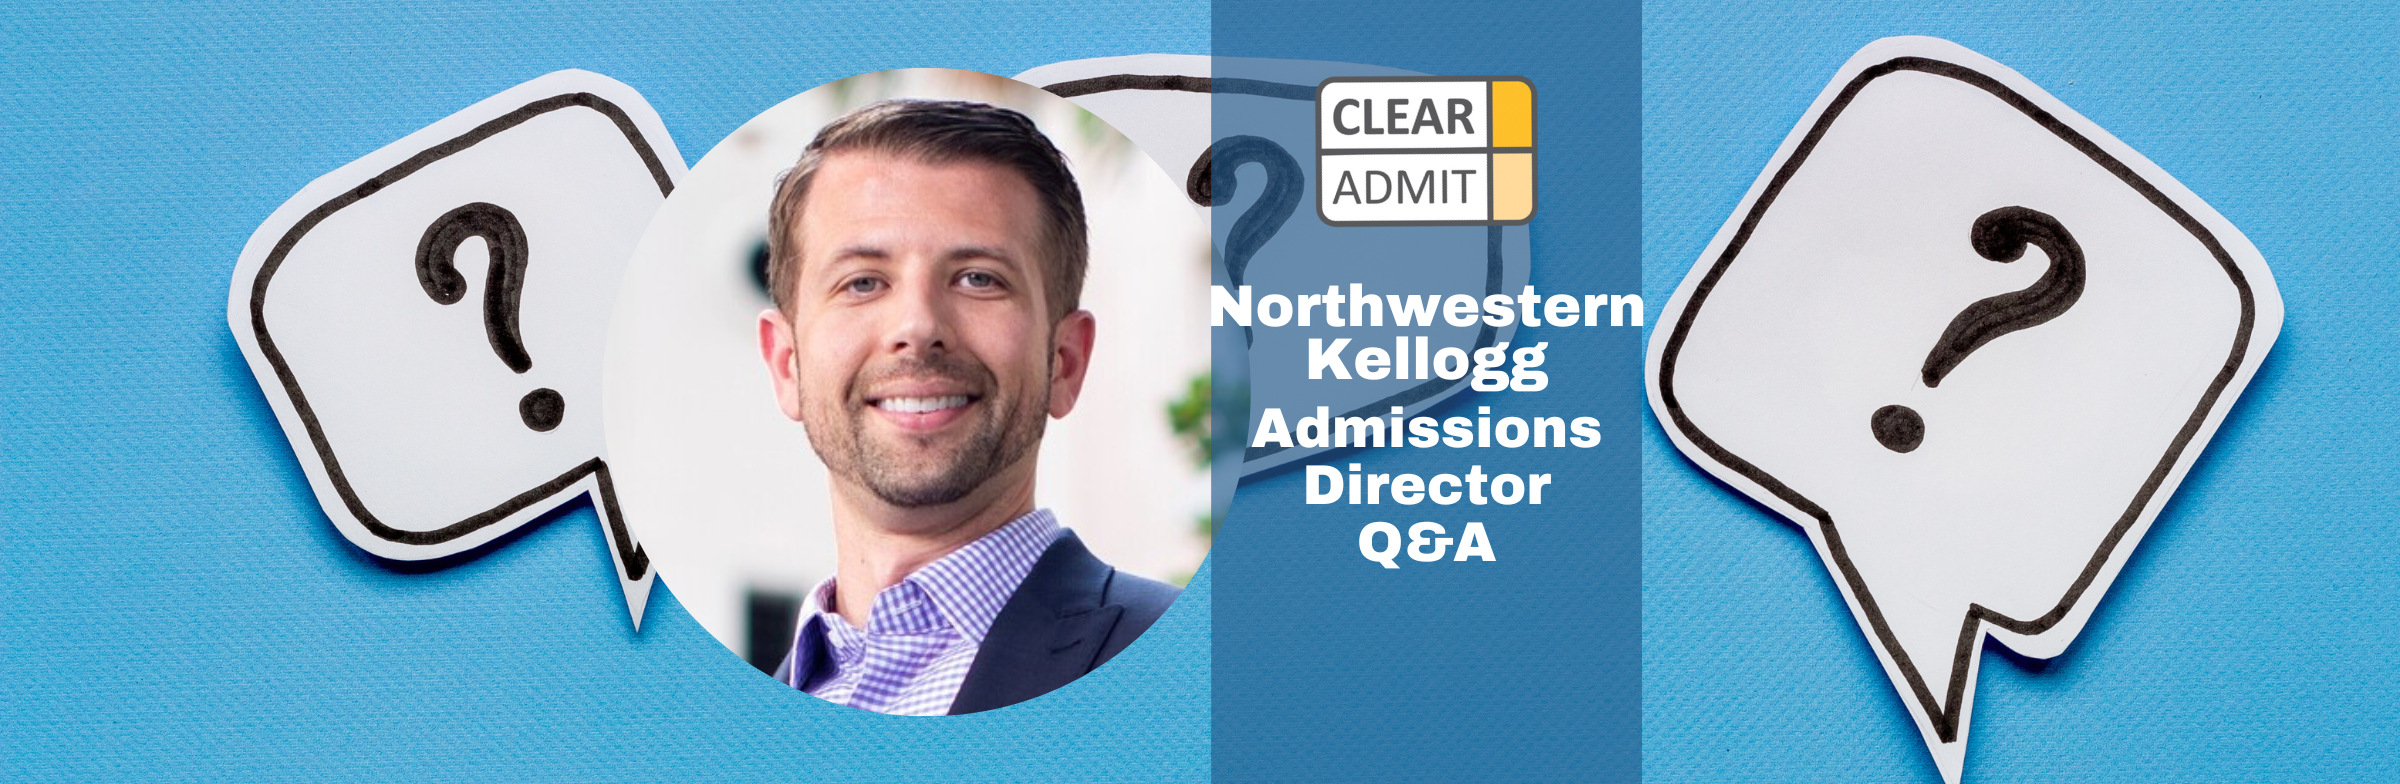 Image for Admissions Director Q&A: Steve Thompson of Northwestern Kellogg